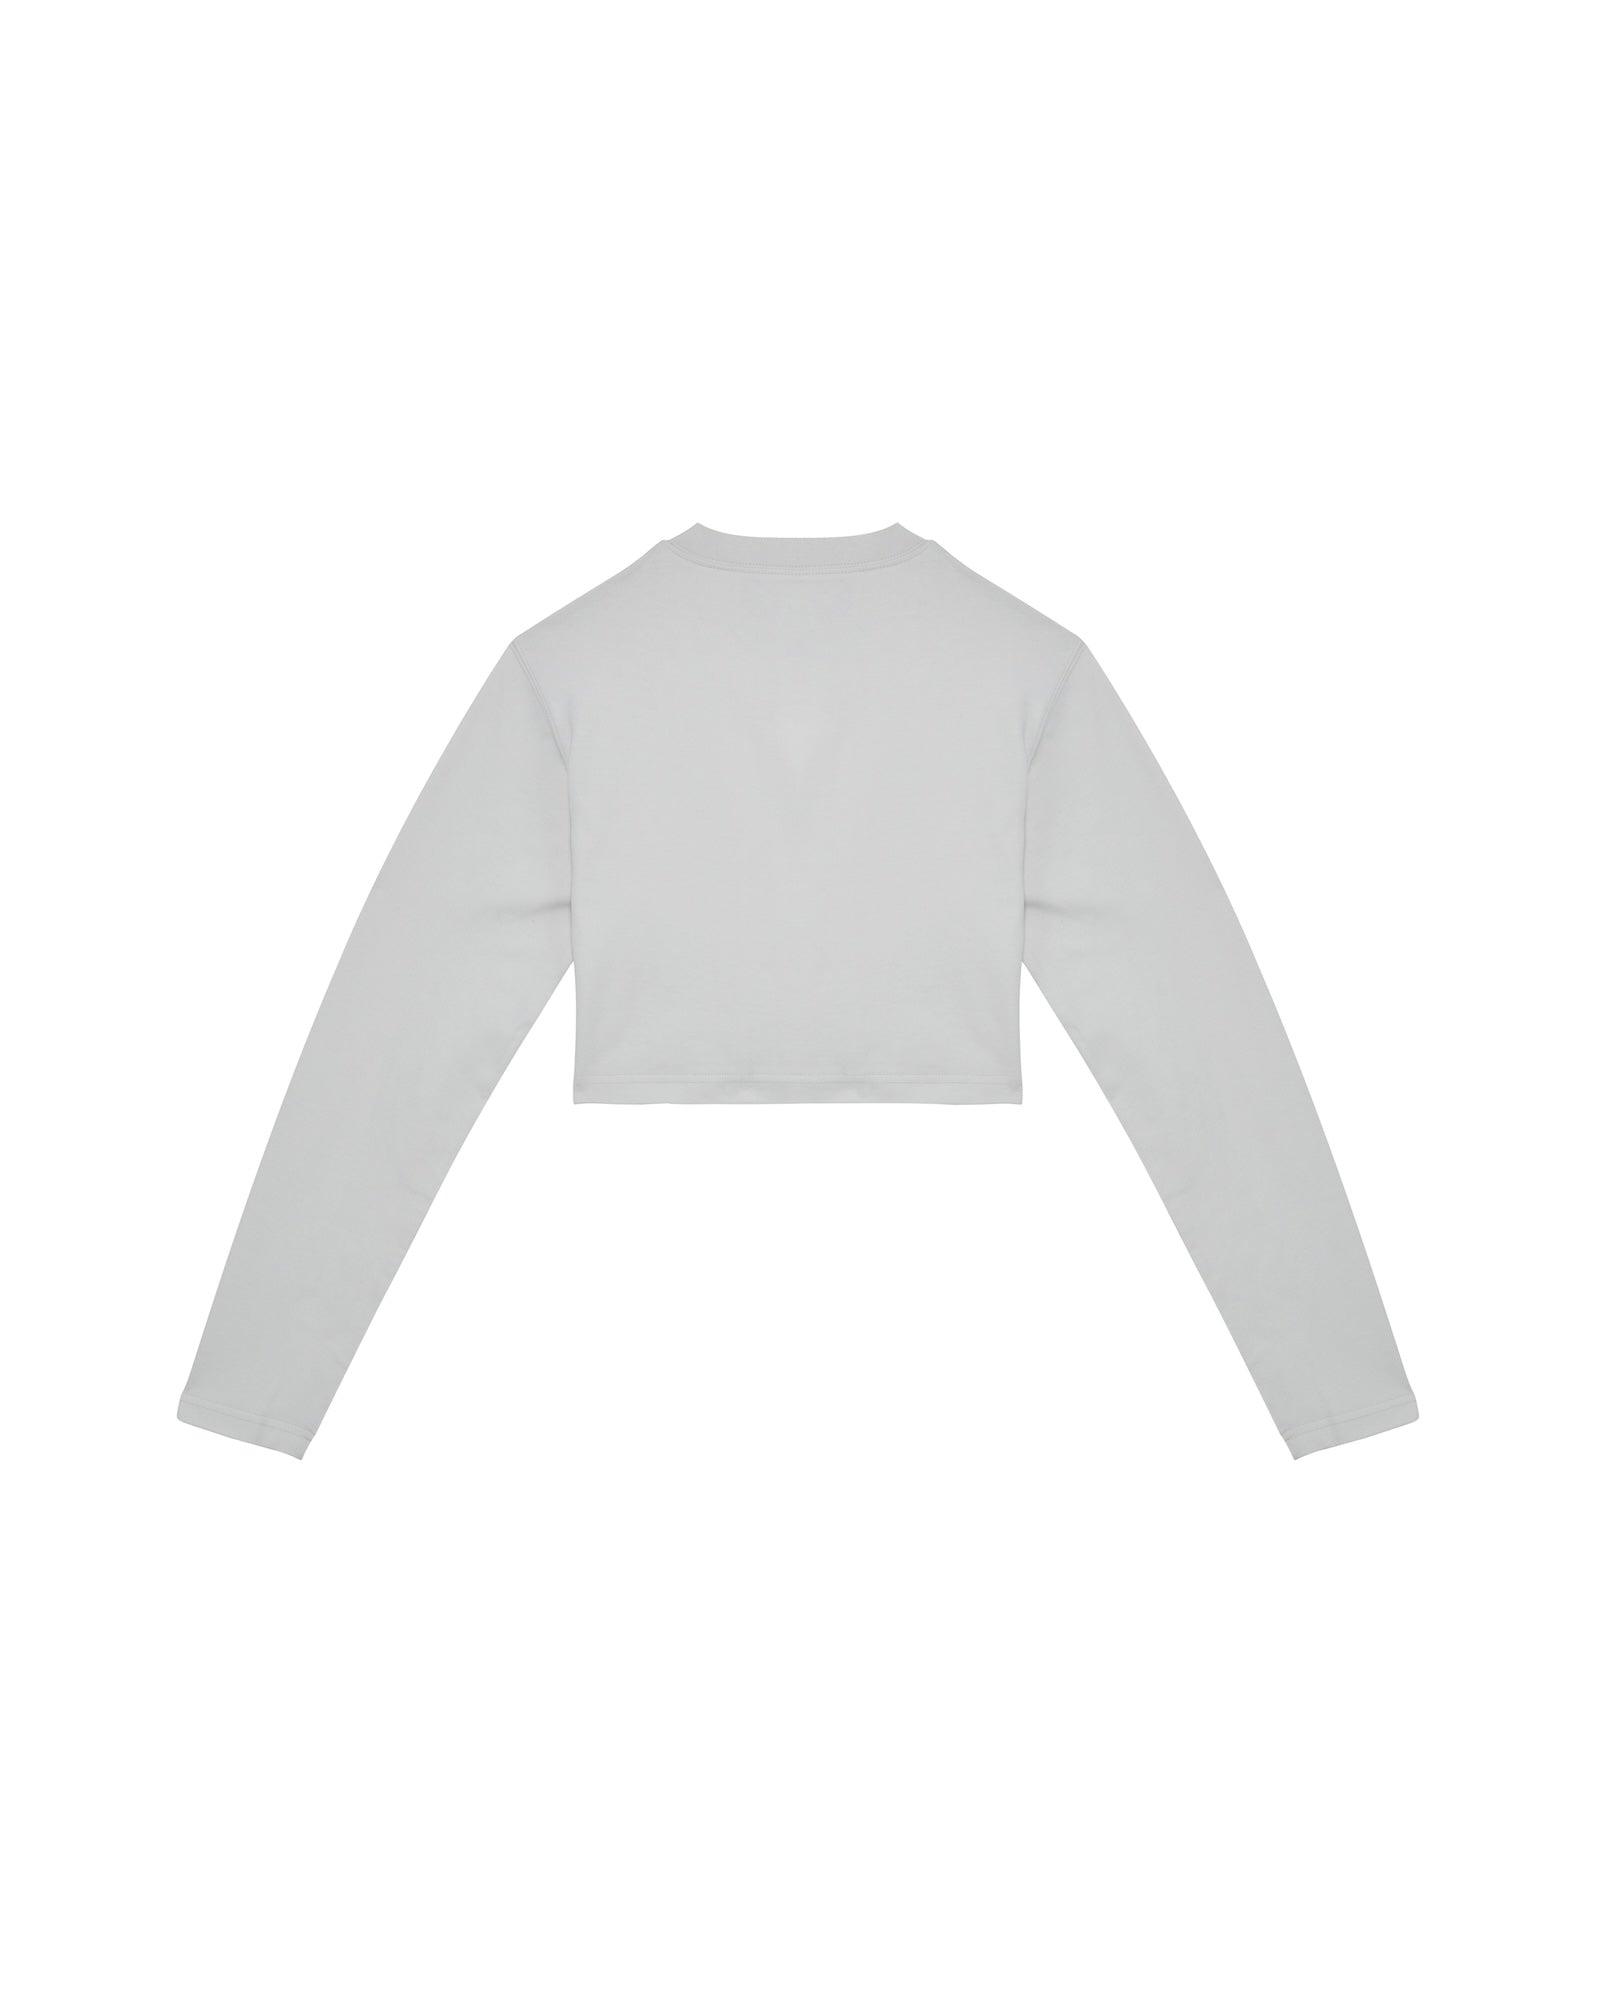 Secrets and Lies L/S Crop T-Shirt - SOON TO BE ANNOUNCED